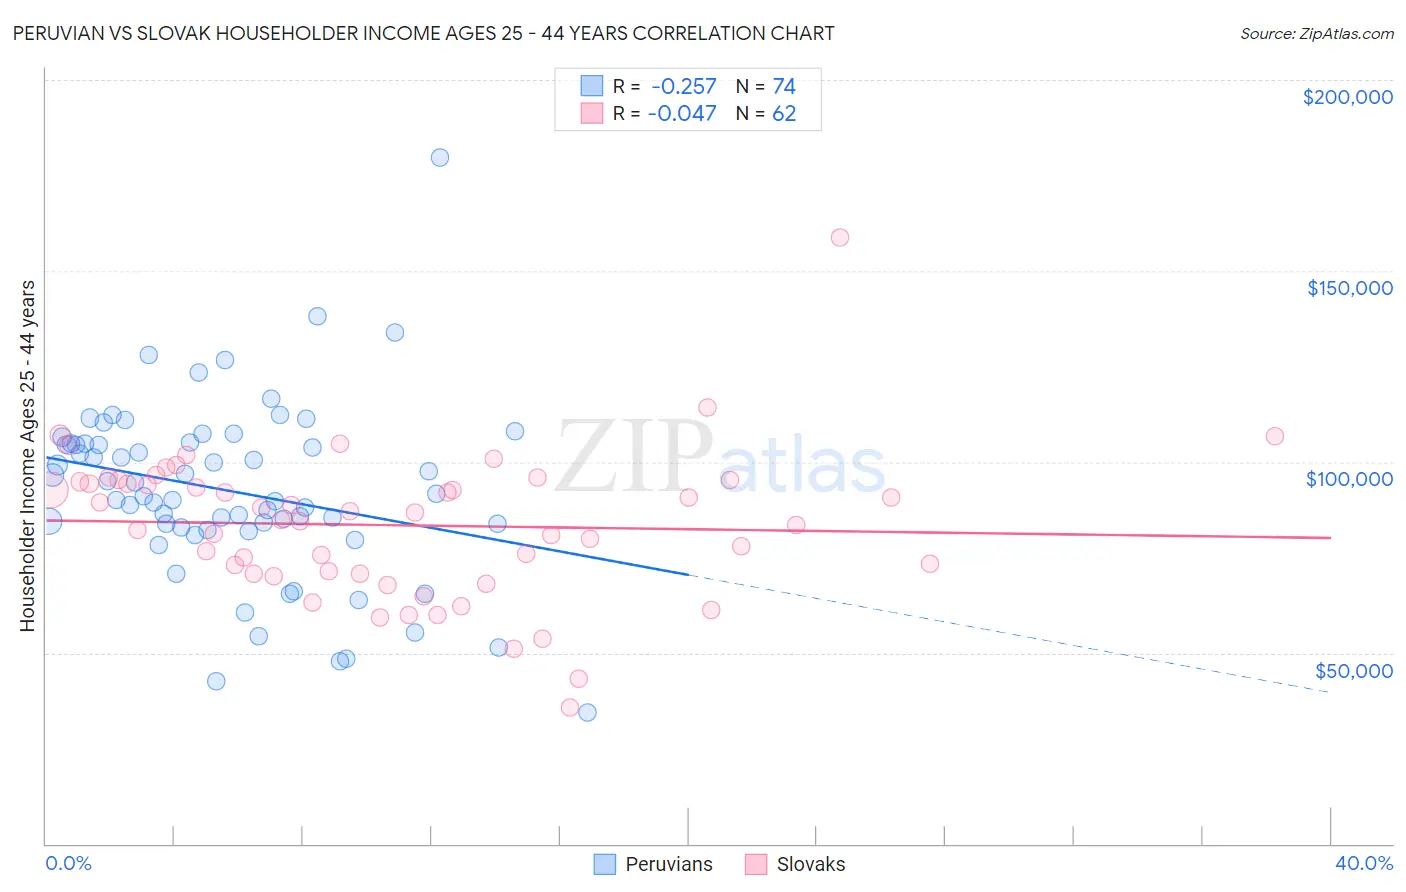 Peruvian vs Slovak Householder Income Ages 25 - 44 years